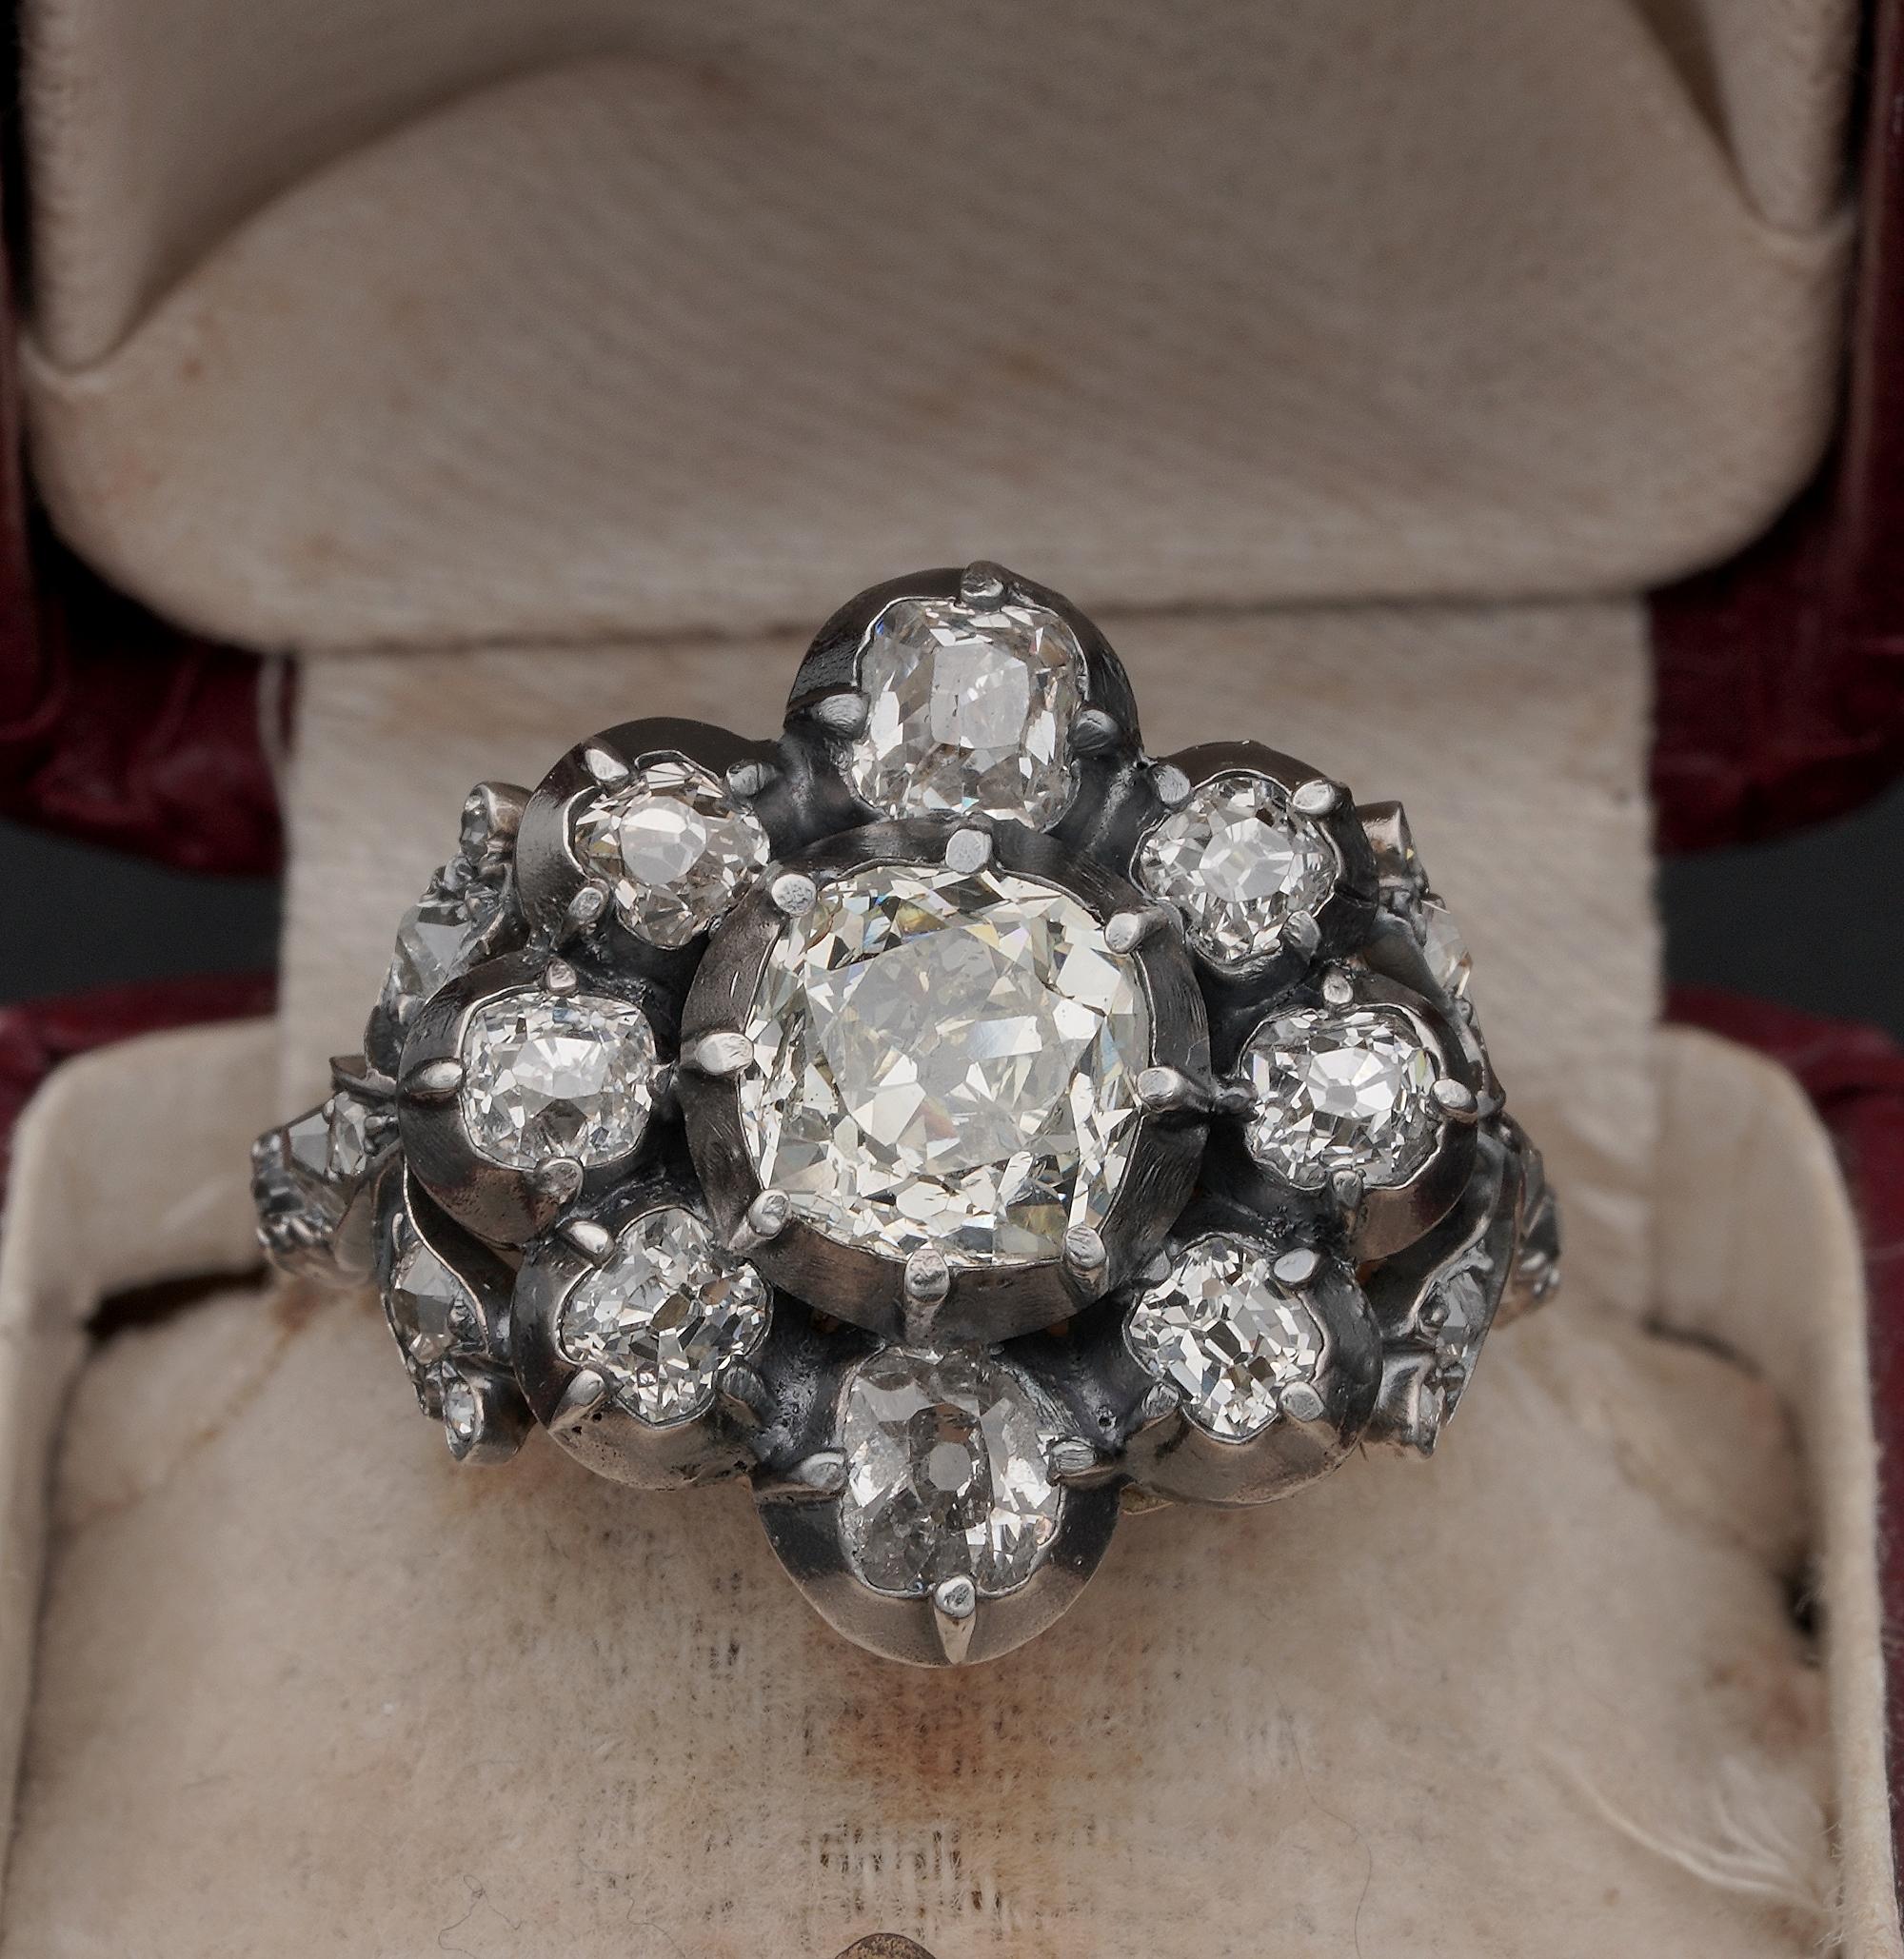 Magnificent Treasure

Early 19th century ring ageless – French import marks – rare beautiful antique ring
An important example for age, crafting, Diamond content and hall marks
Glorious in crafting, solid 18 kt gold and silver
Imposing in presence,